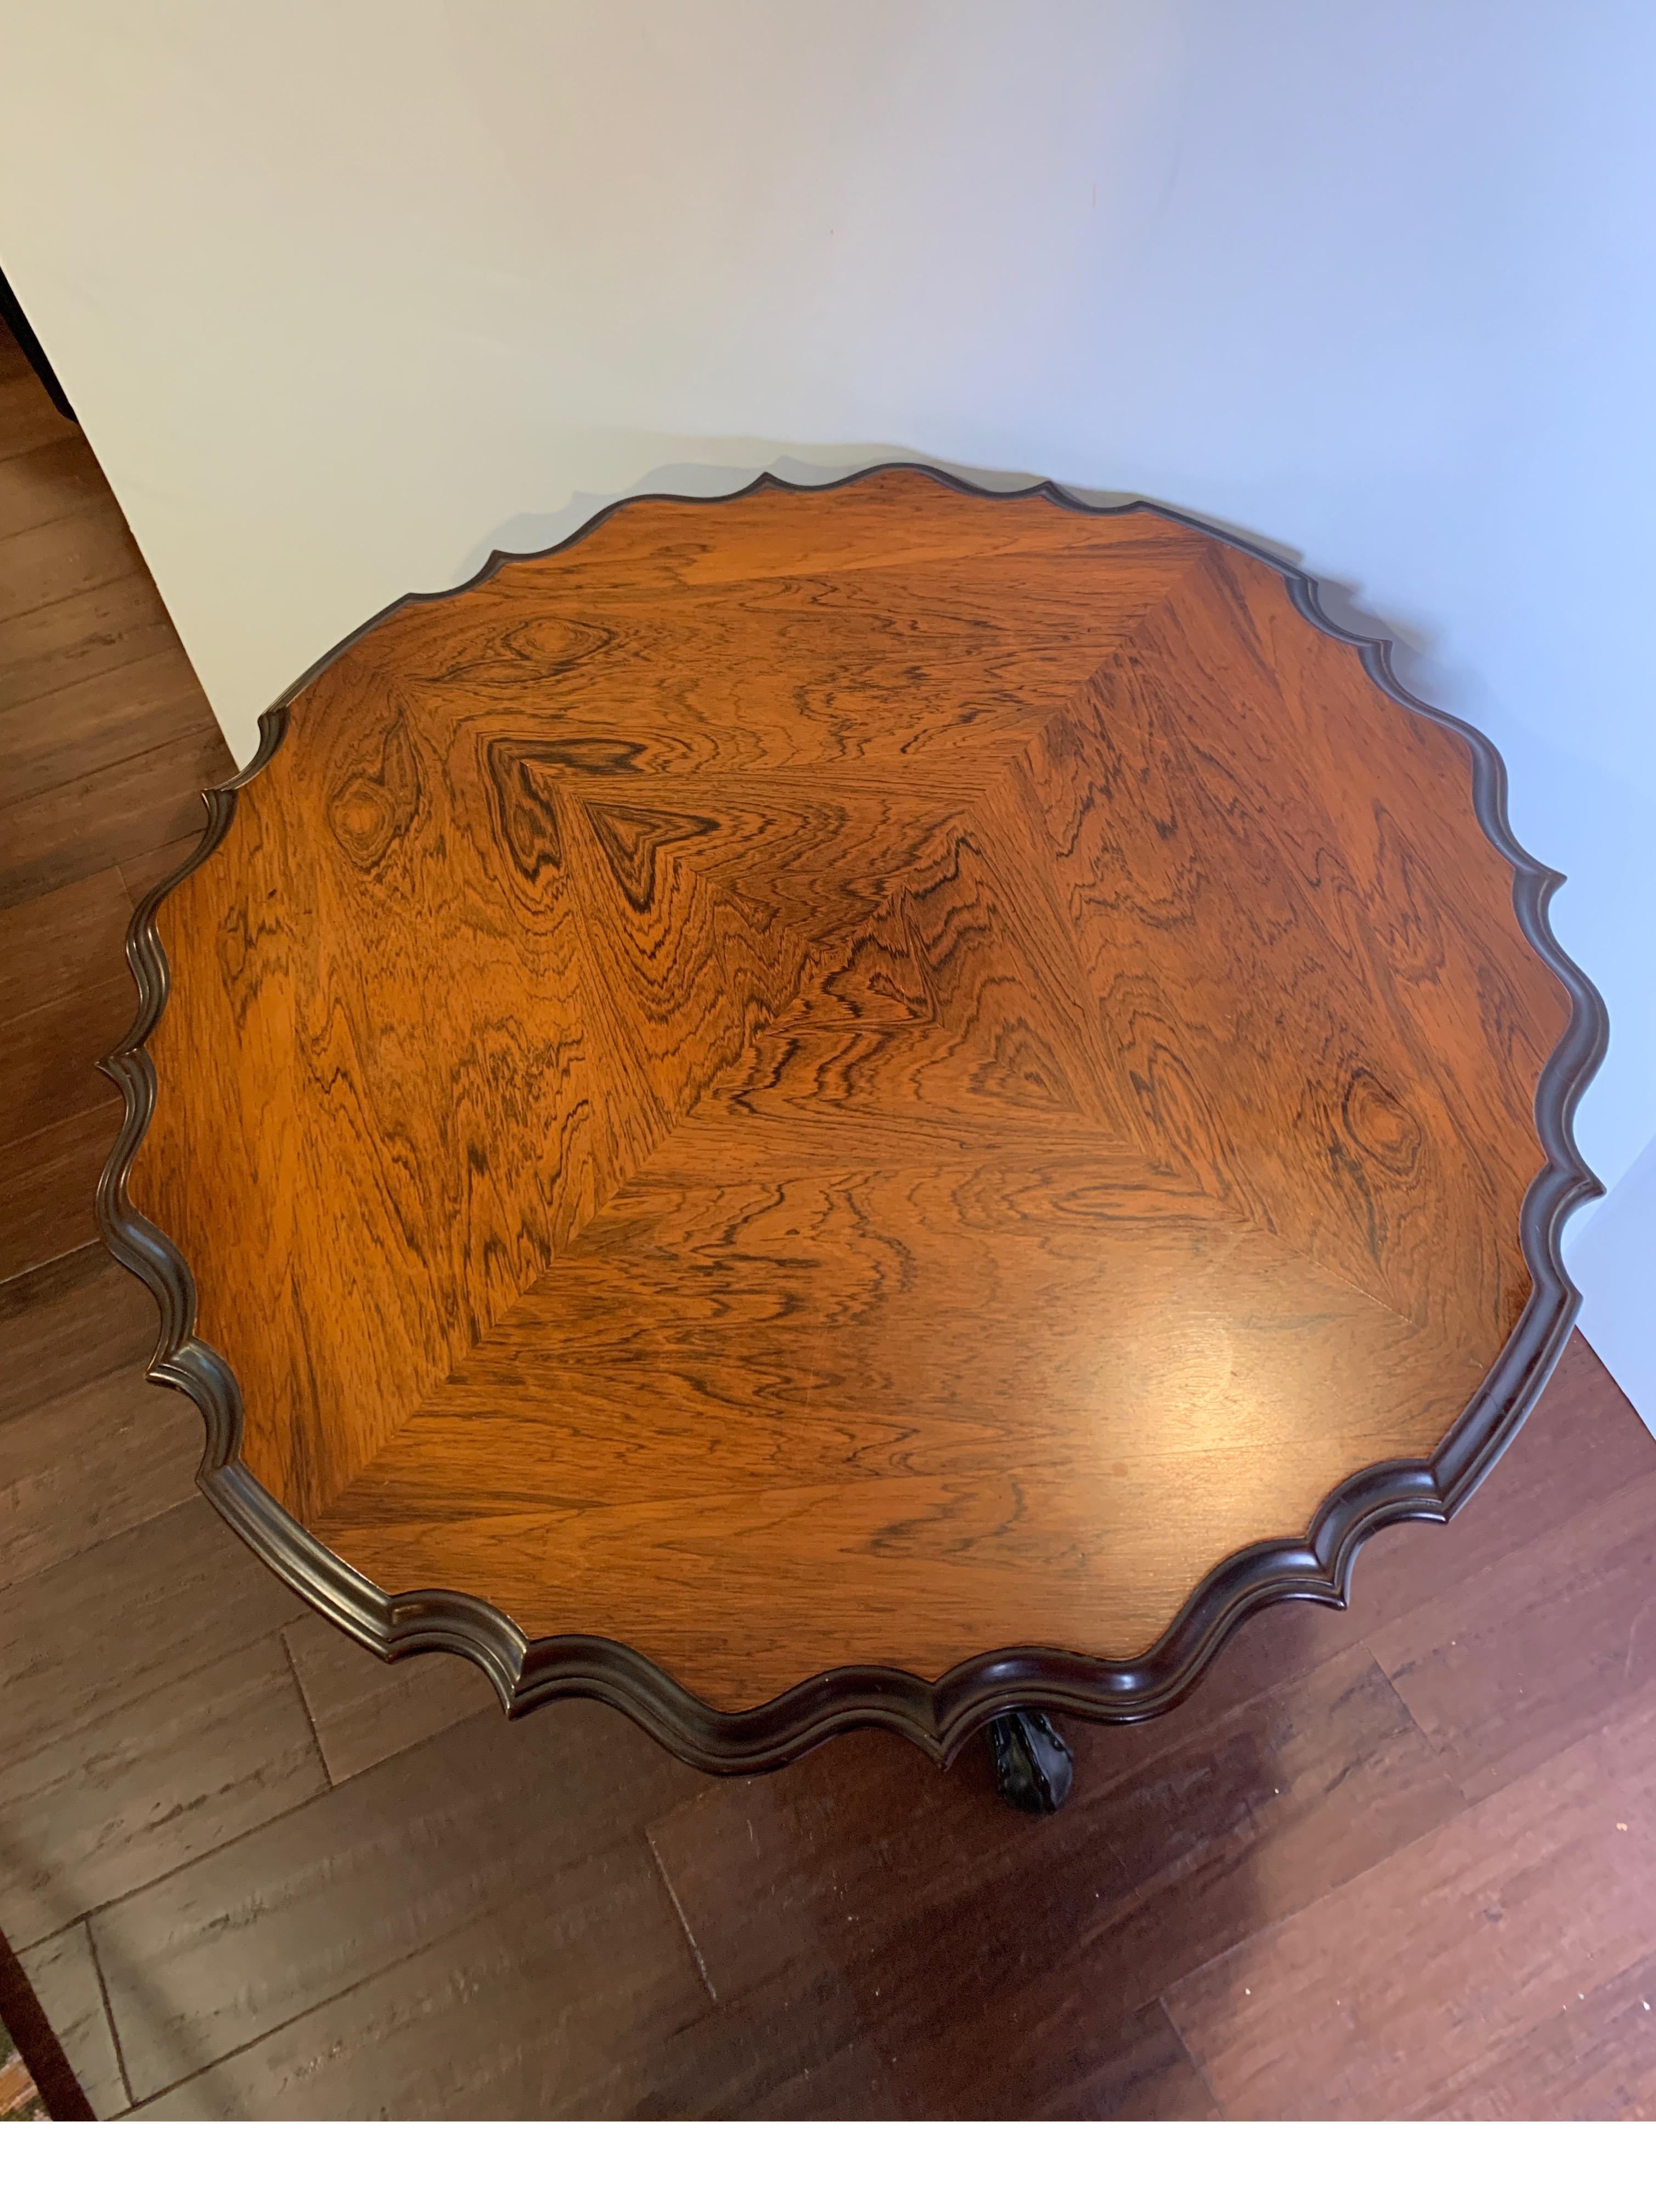 Nicely carved wood tilt-top table, mahogany with a rosewood top, circa 1930-1940
Nice table for almost any room and can also be displayed with top tilted.